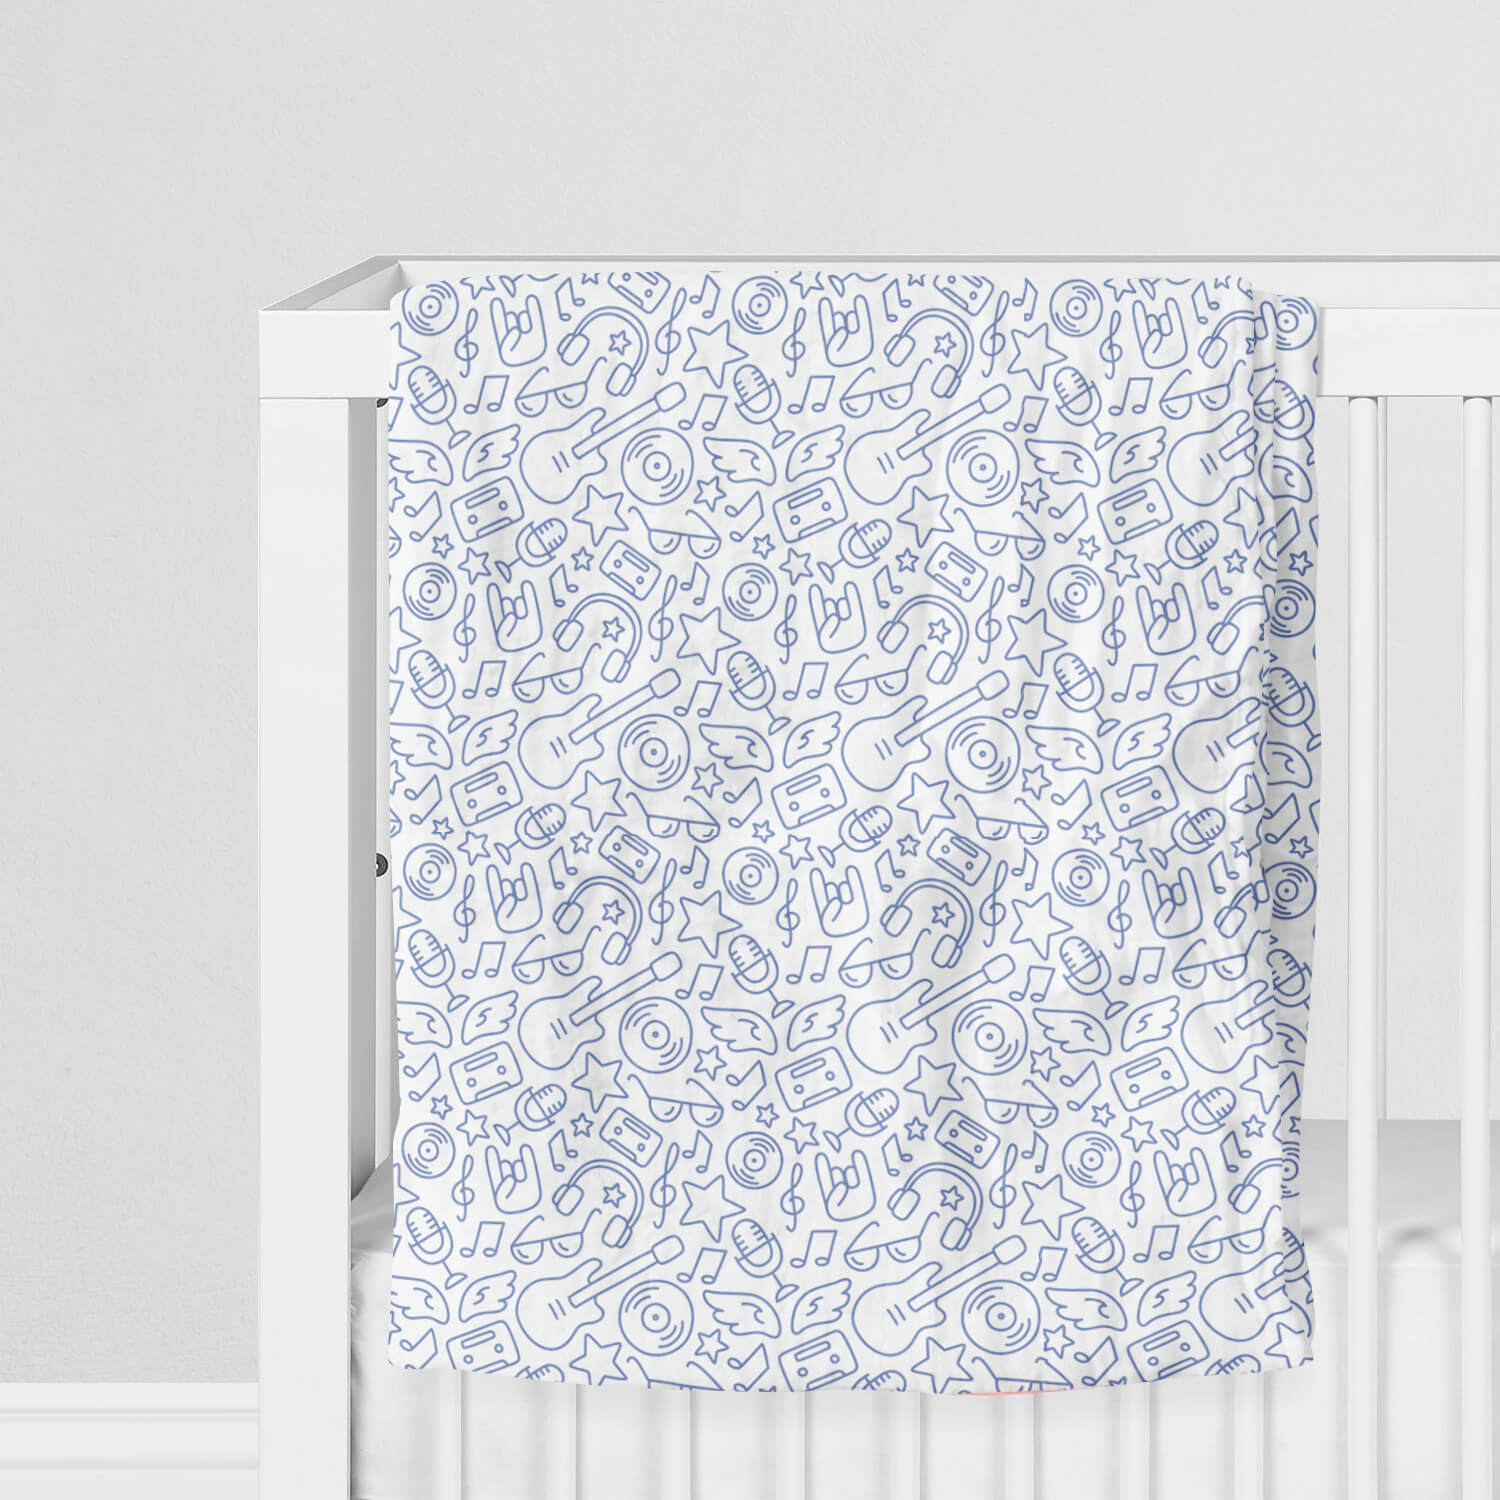 100% Muslin Cotton Swaddle Blanket with Rock 'N' Roll pattern on crib